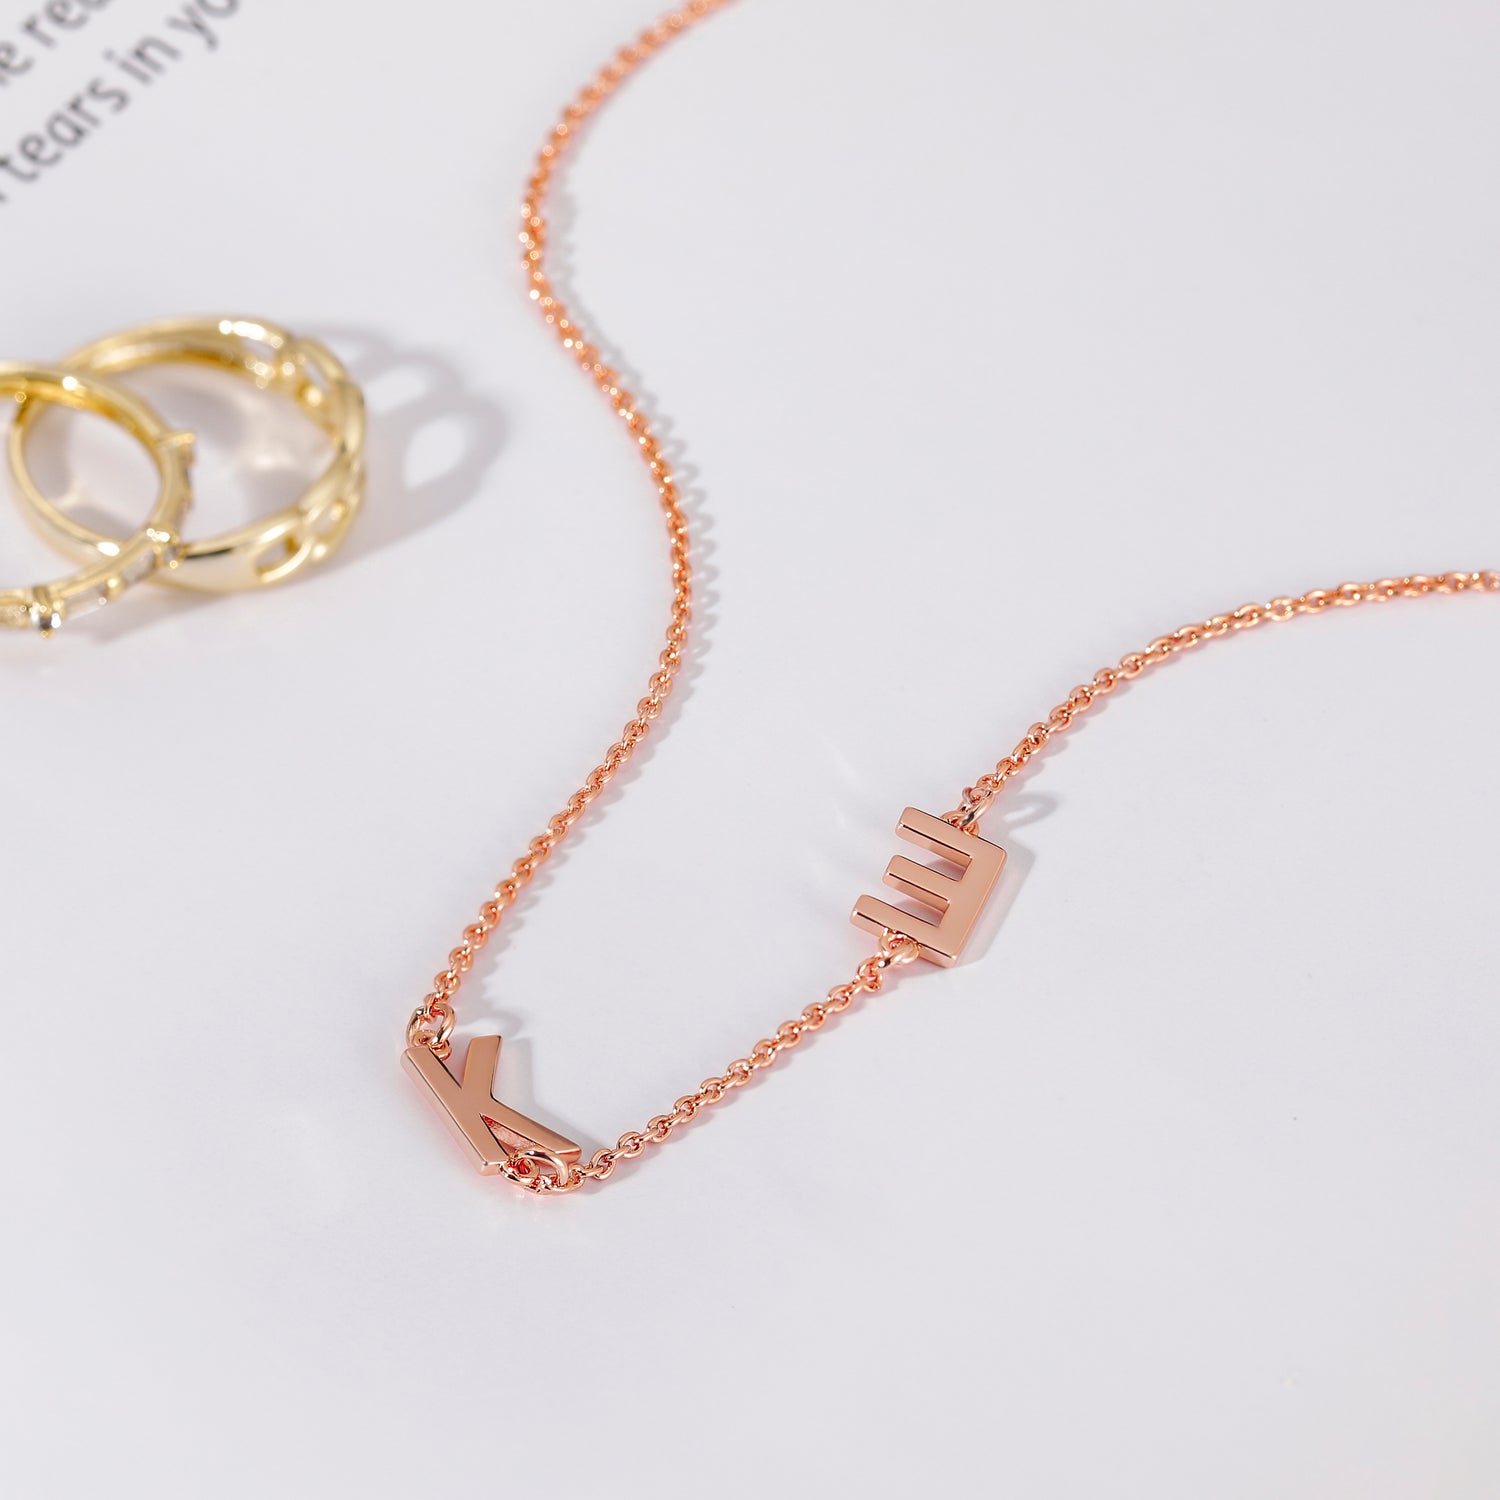 rose gold necklace, solid gold necklace, 14K gold jewelry